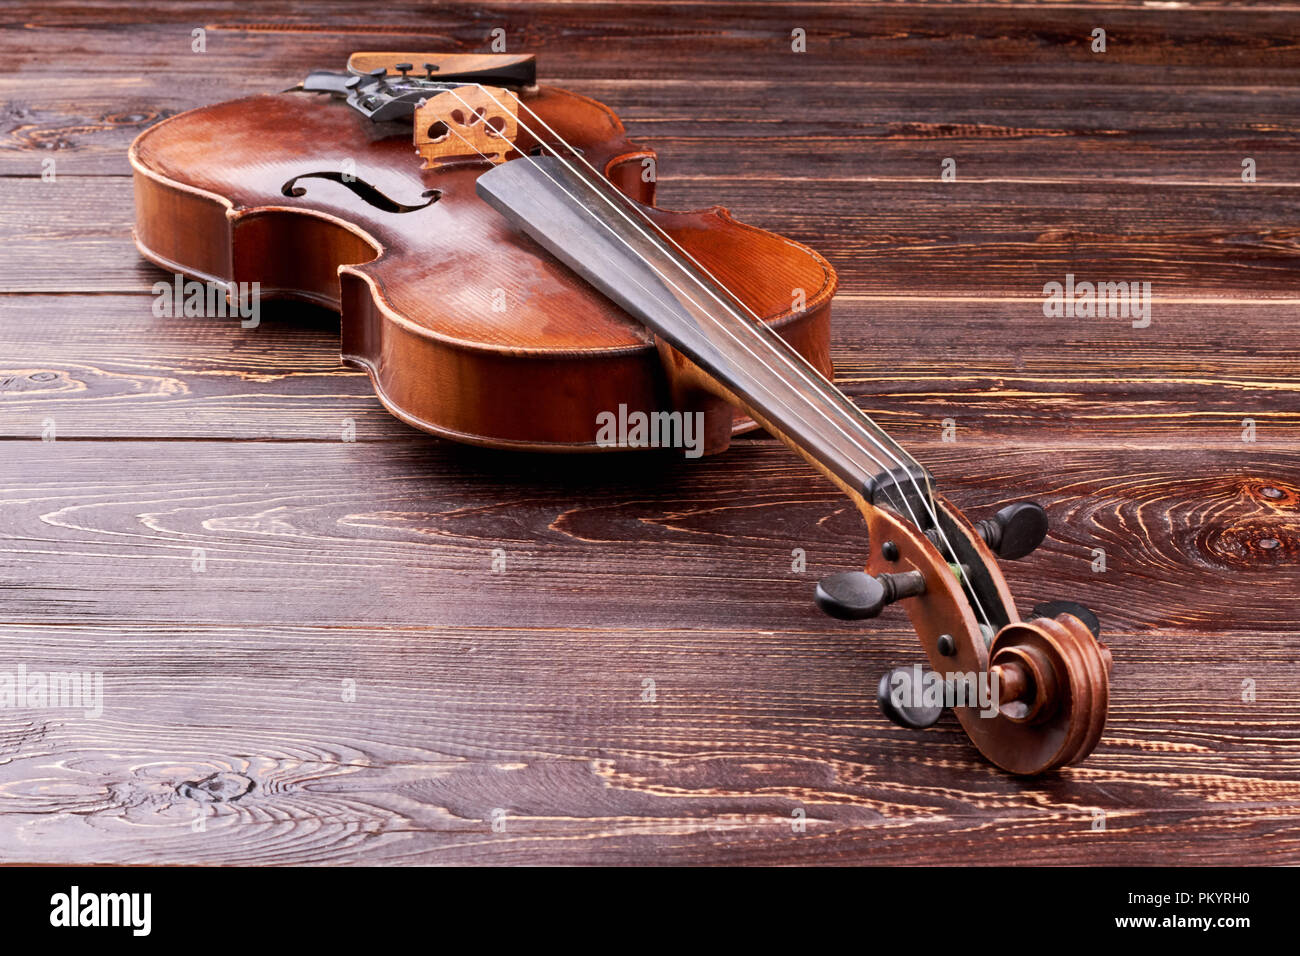 Violin on brown wooden background. Stock Photo